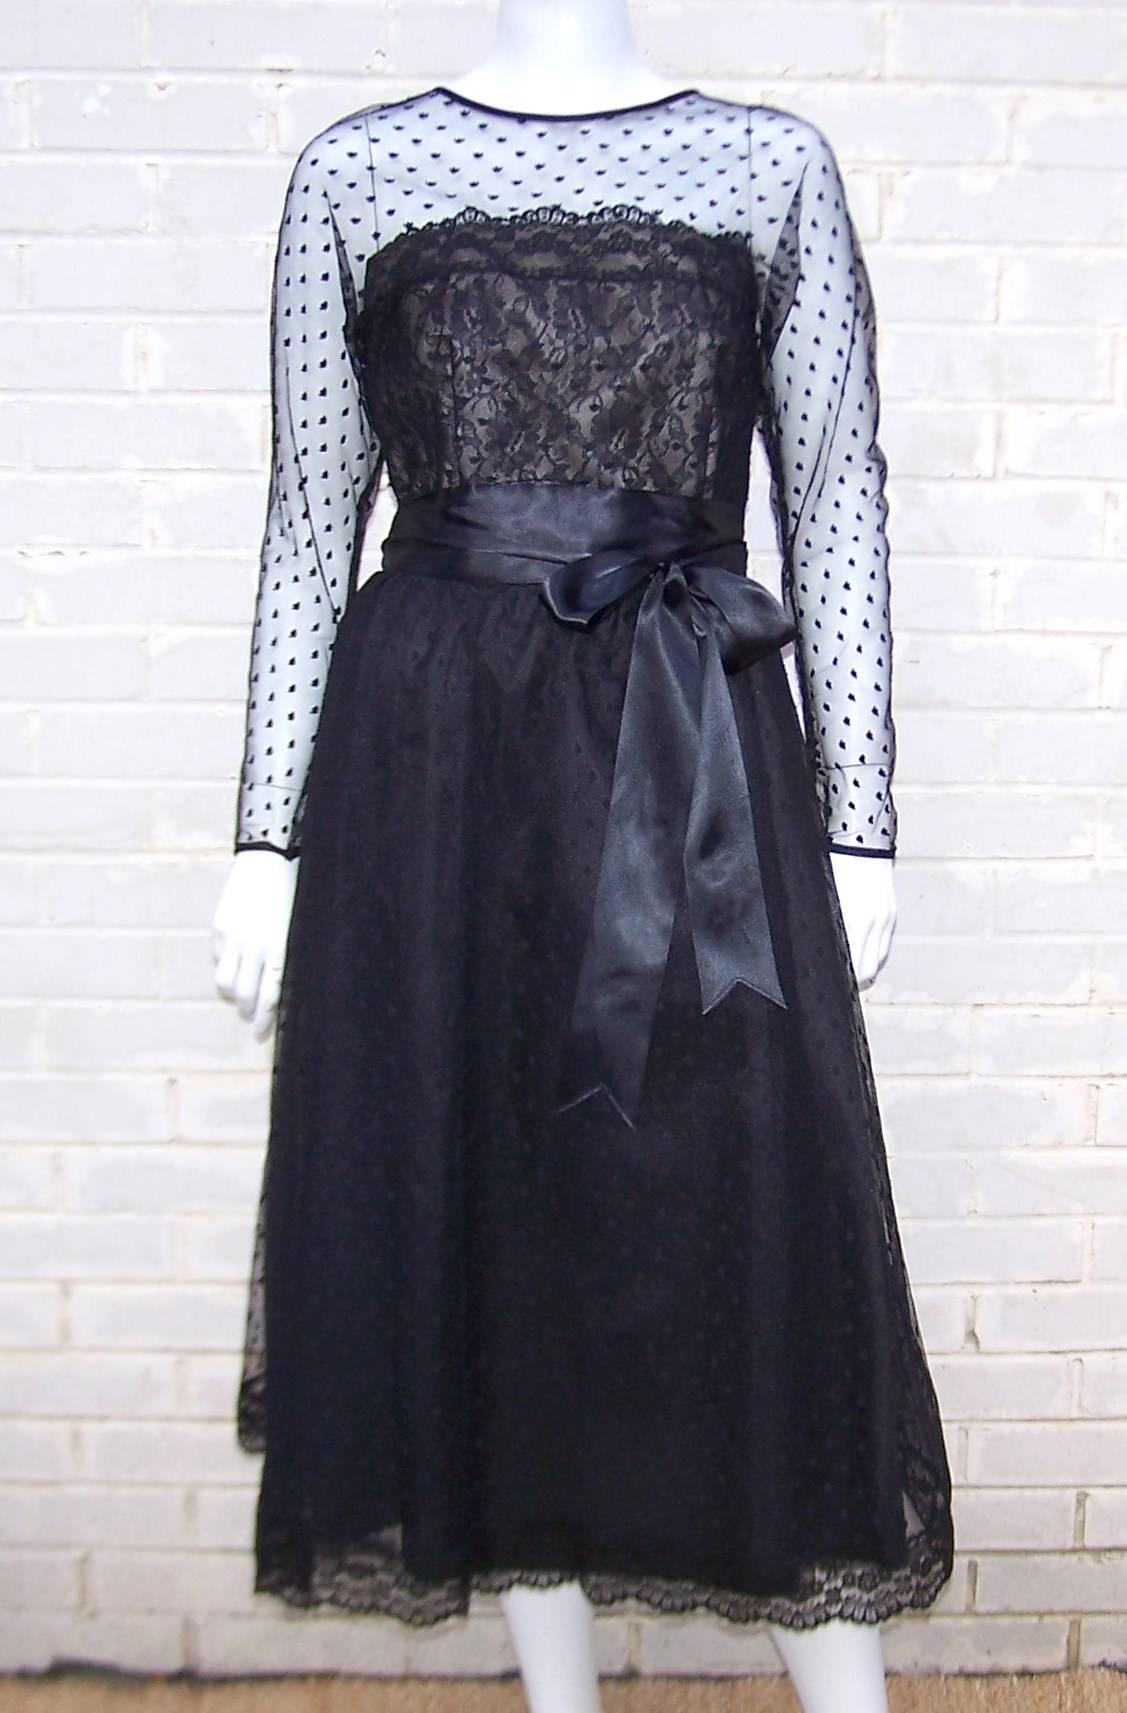 Victor Costa earned a name for himself by designing fashionable and yet affordable evening wear with a nod to the higher end American and French designer labels.  This classic black lace dress is strongly influenced by the nude illusion designs